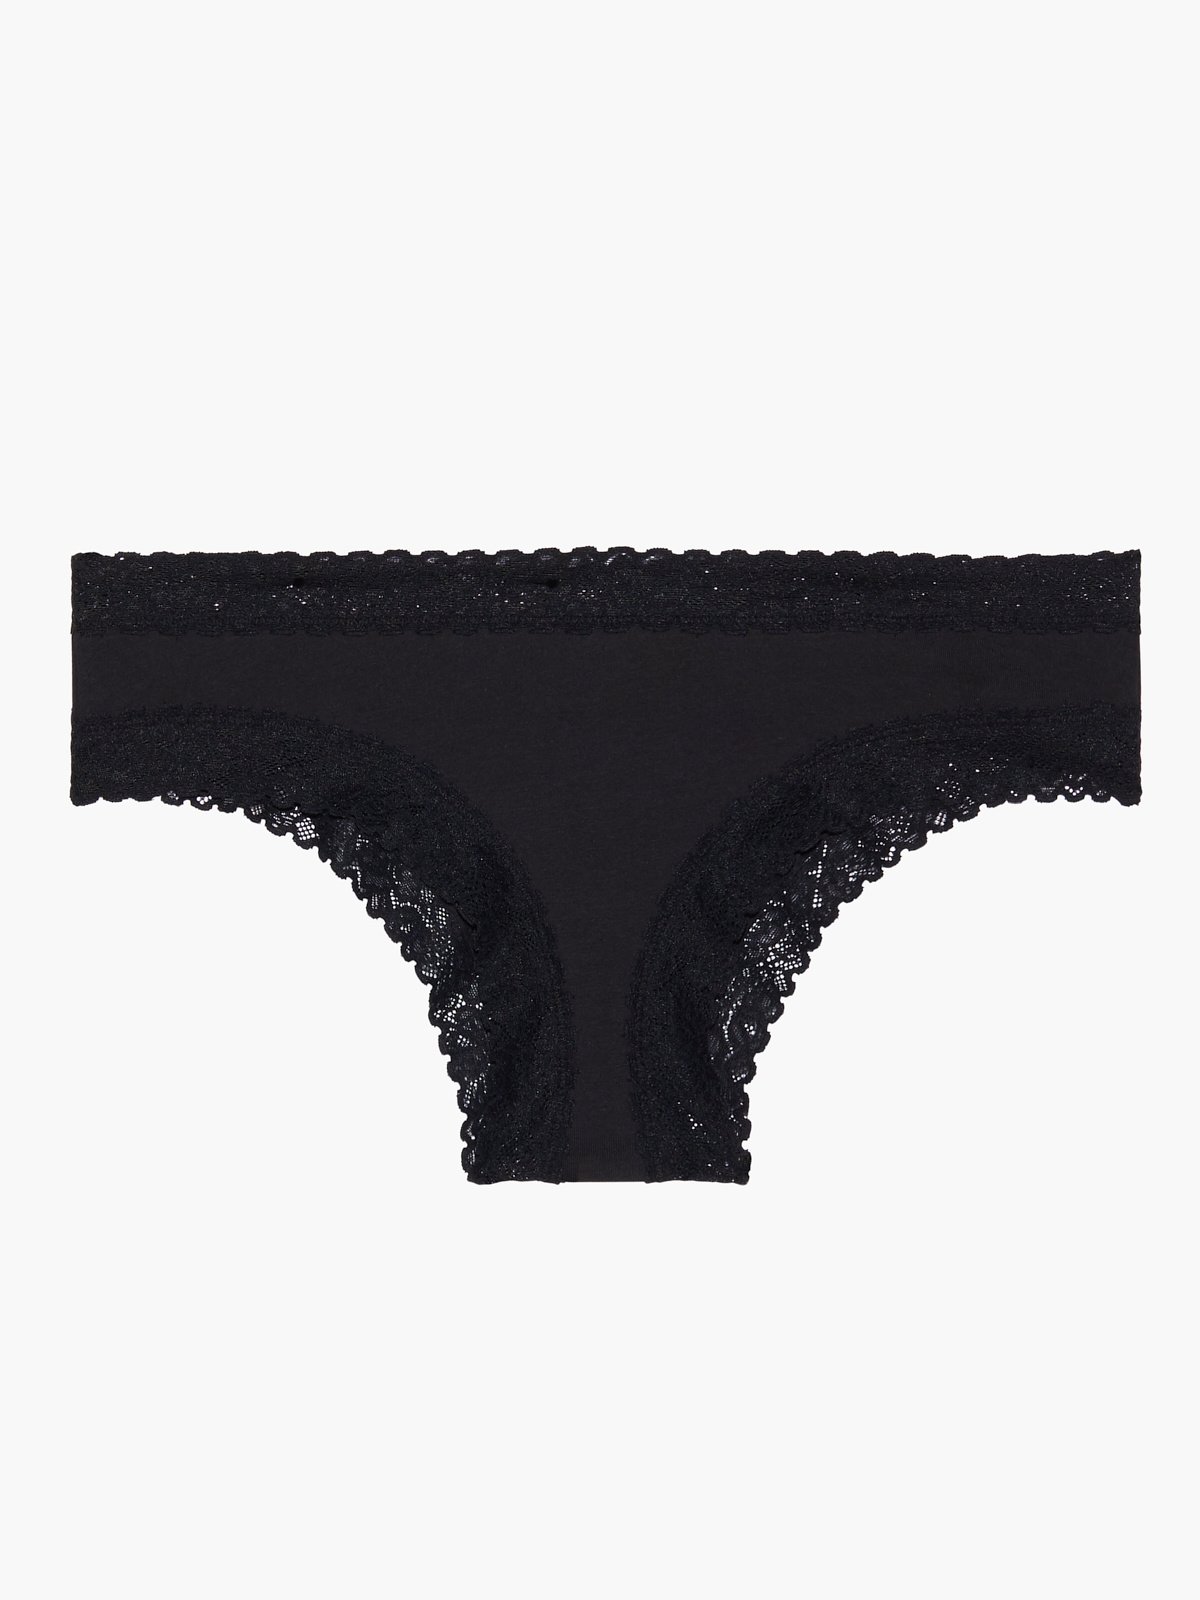 JUICY COUTURE - NEW - SMALL - BLACK - COTTON STRETCH HIPSTER PANTY